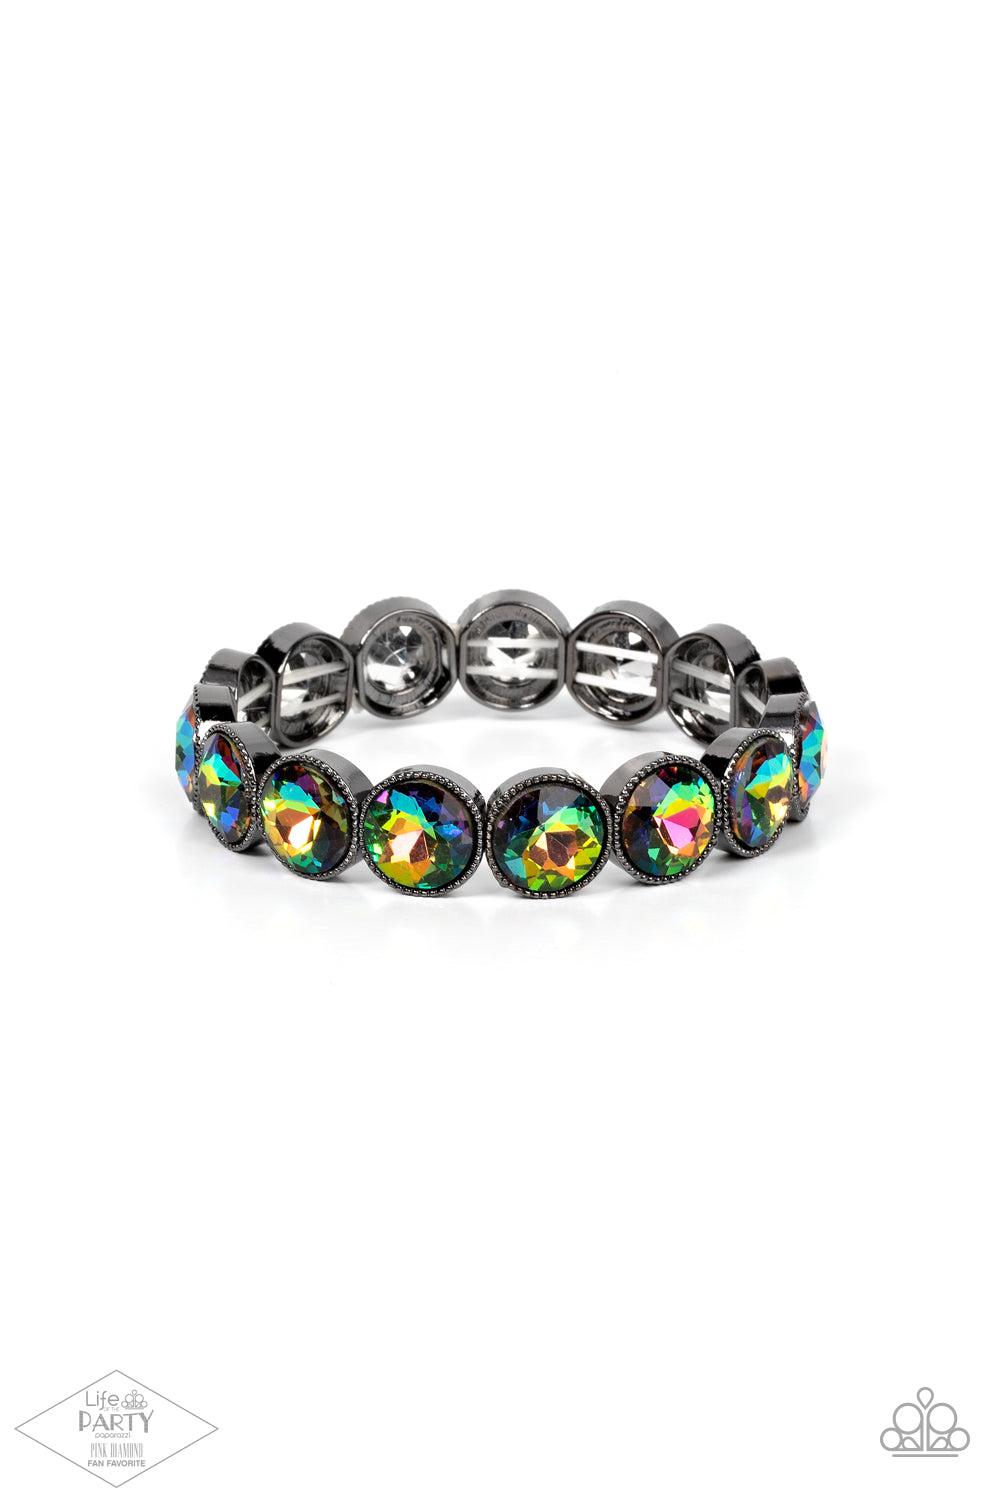 Number One Knockout - Multi Oil Spill Rhinestone Bracelet - Paparazzi Accessories - Oil spill gems are pressed into sleek gunmetal frames. The glittery frames are threaded along stretchy bands, creating a glamorous look around the wrist.